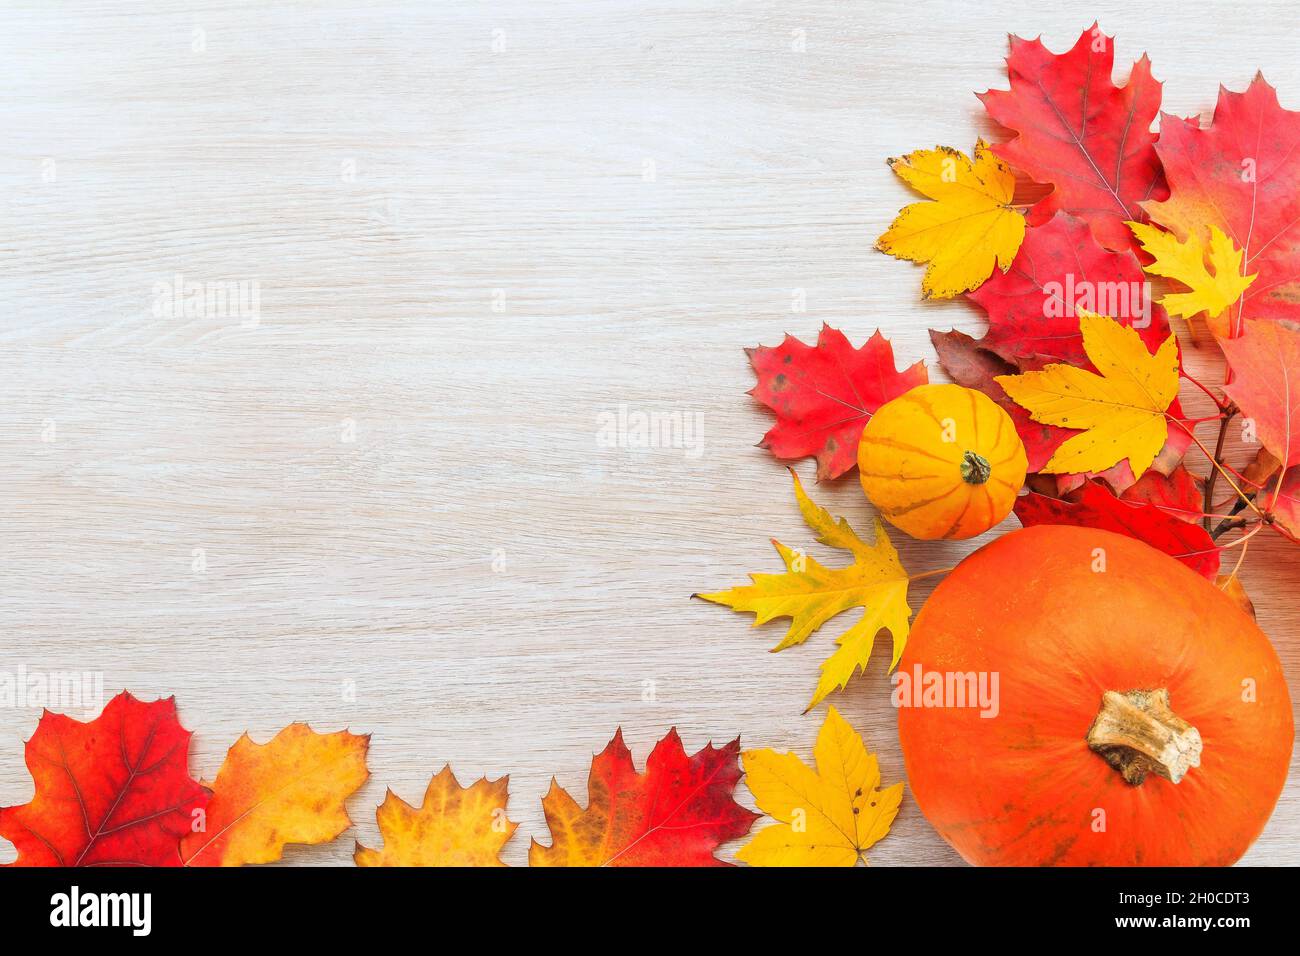 Festive autumn decor from pumpkins and leaves on a wooden background. Flat lay autumn composition with copy space. Stock Photo